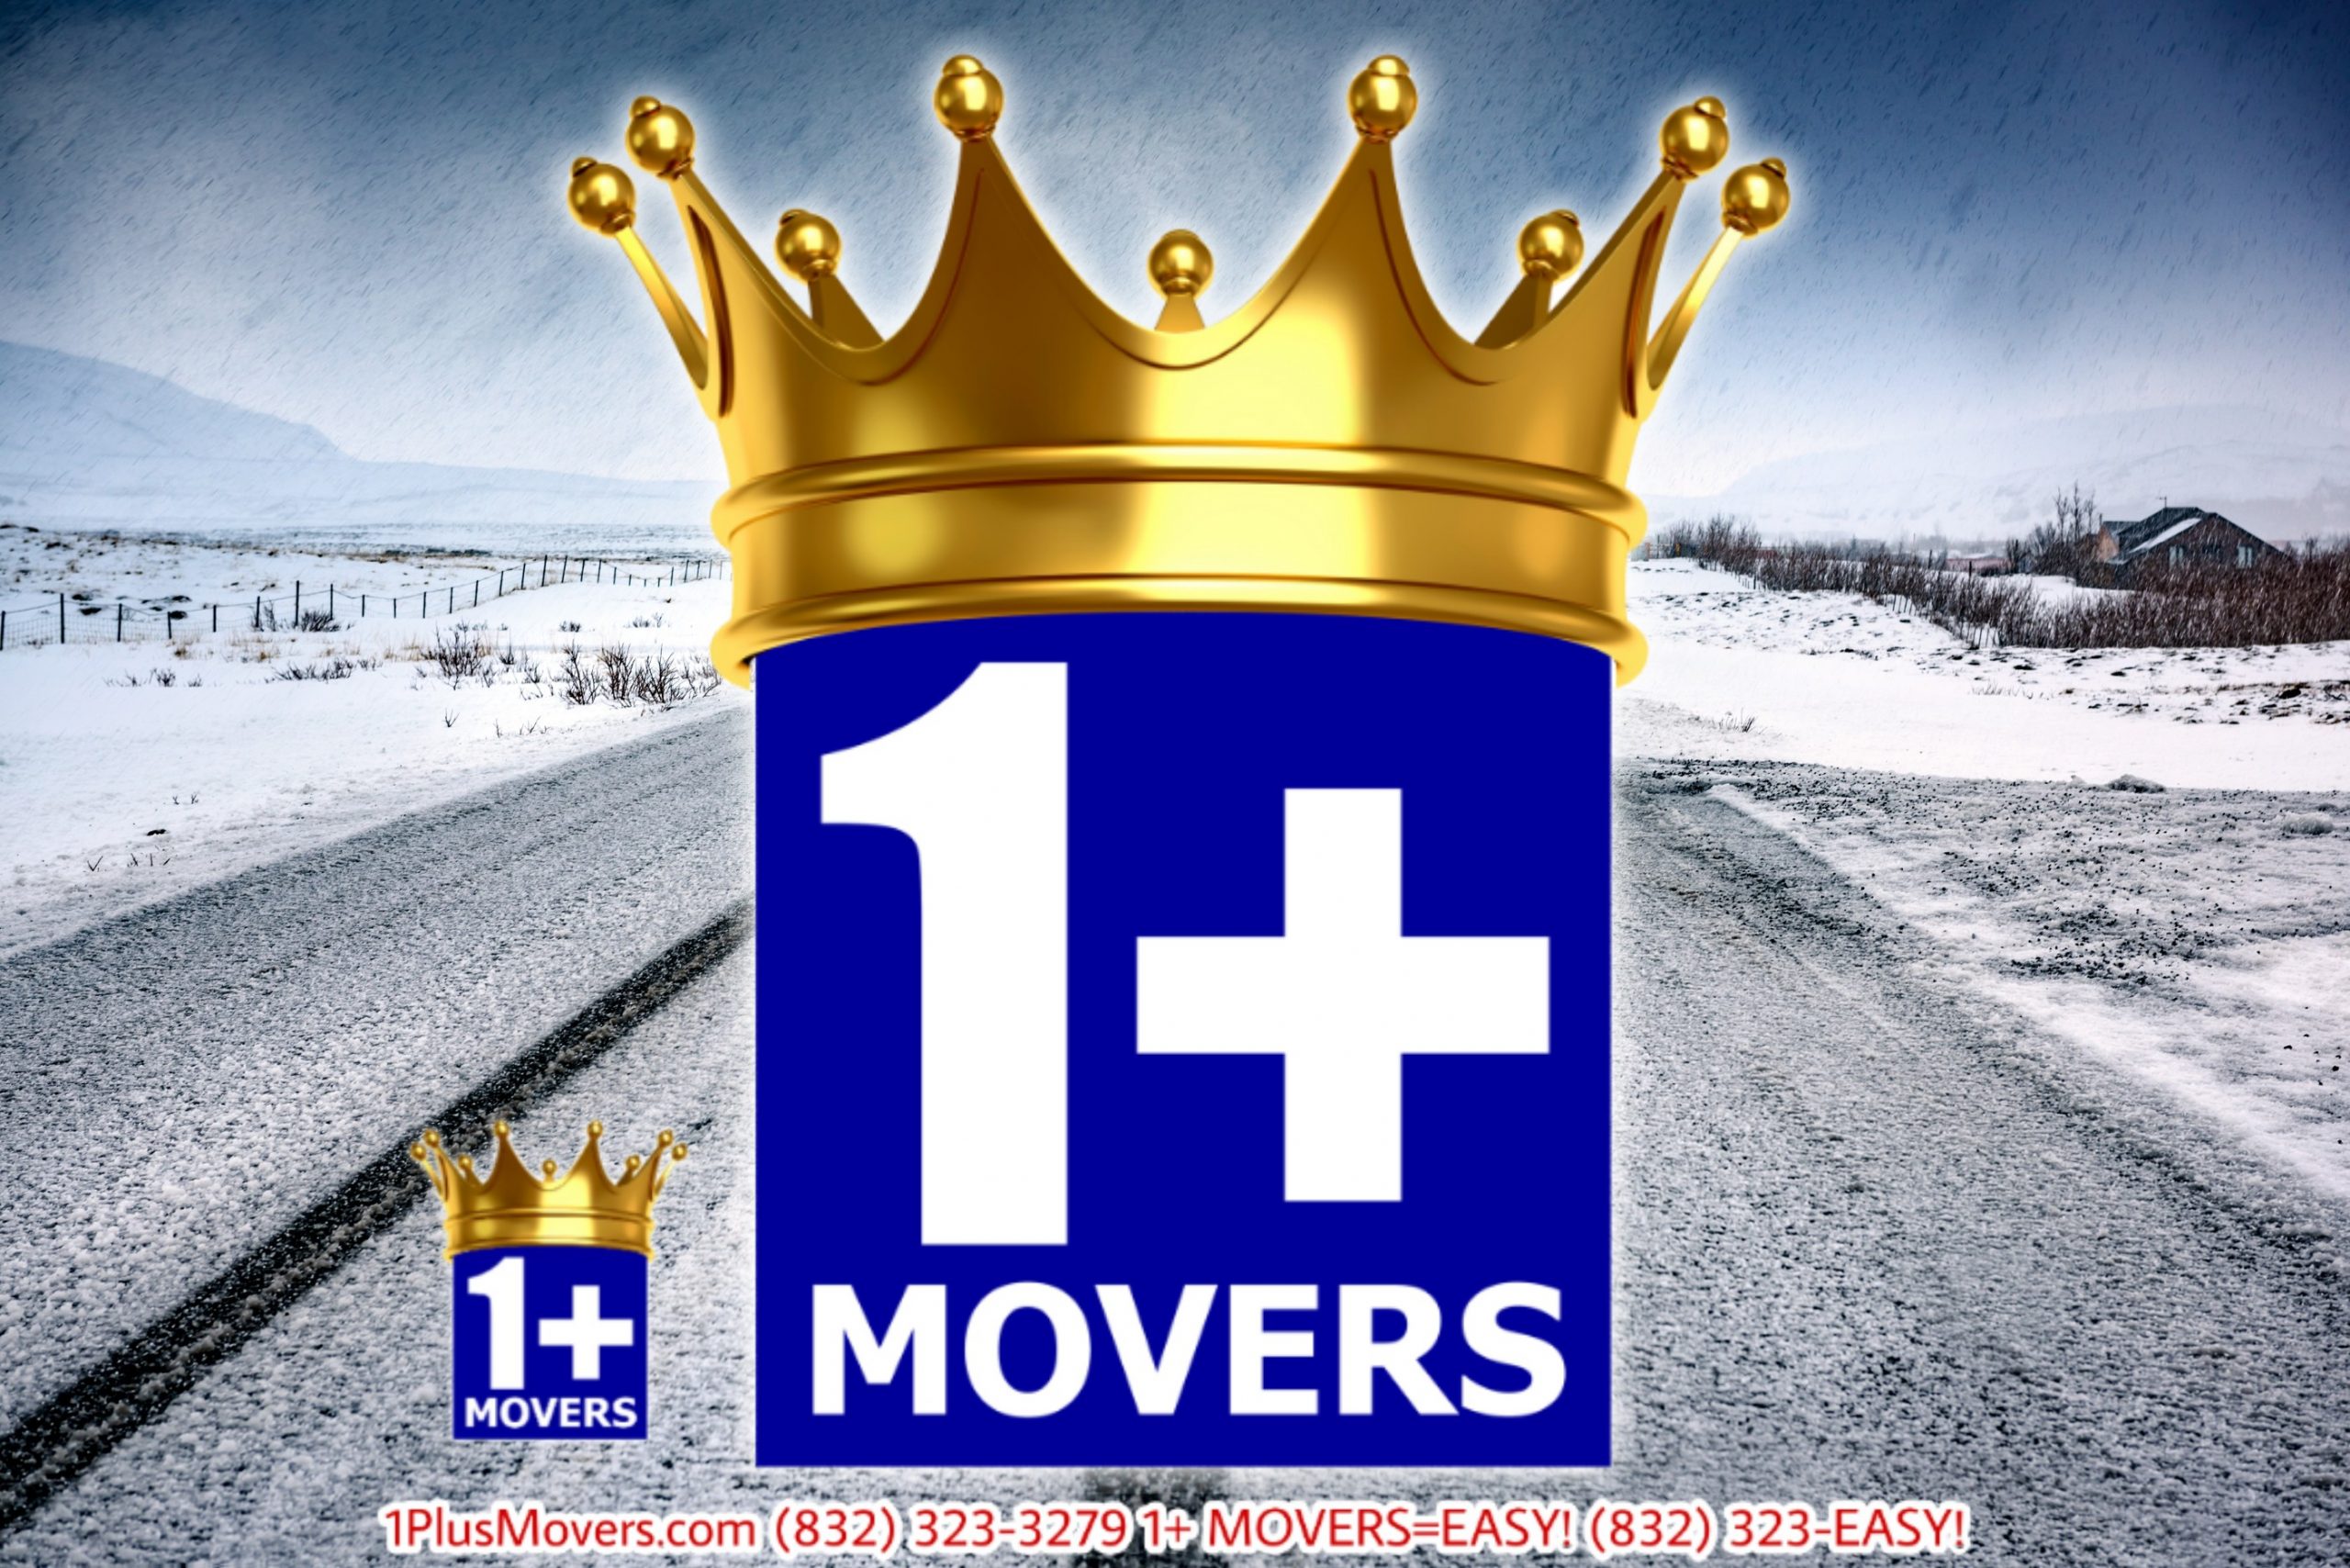 1Plus moving in cold weather Winter Logo